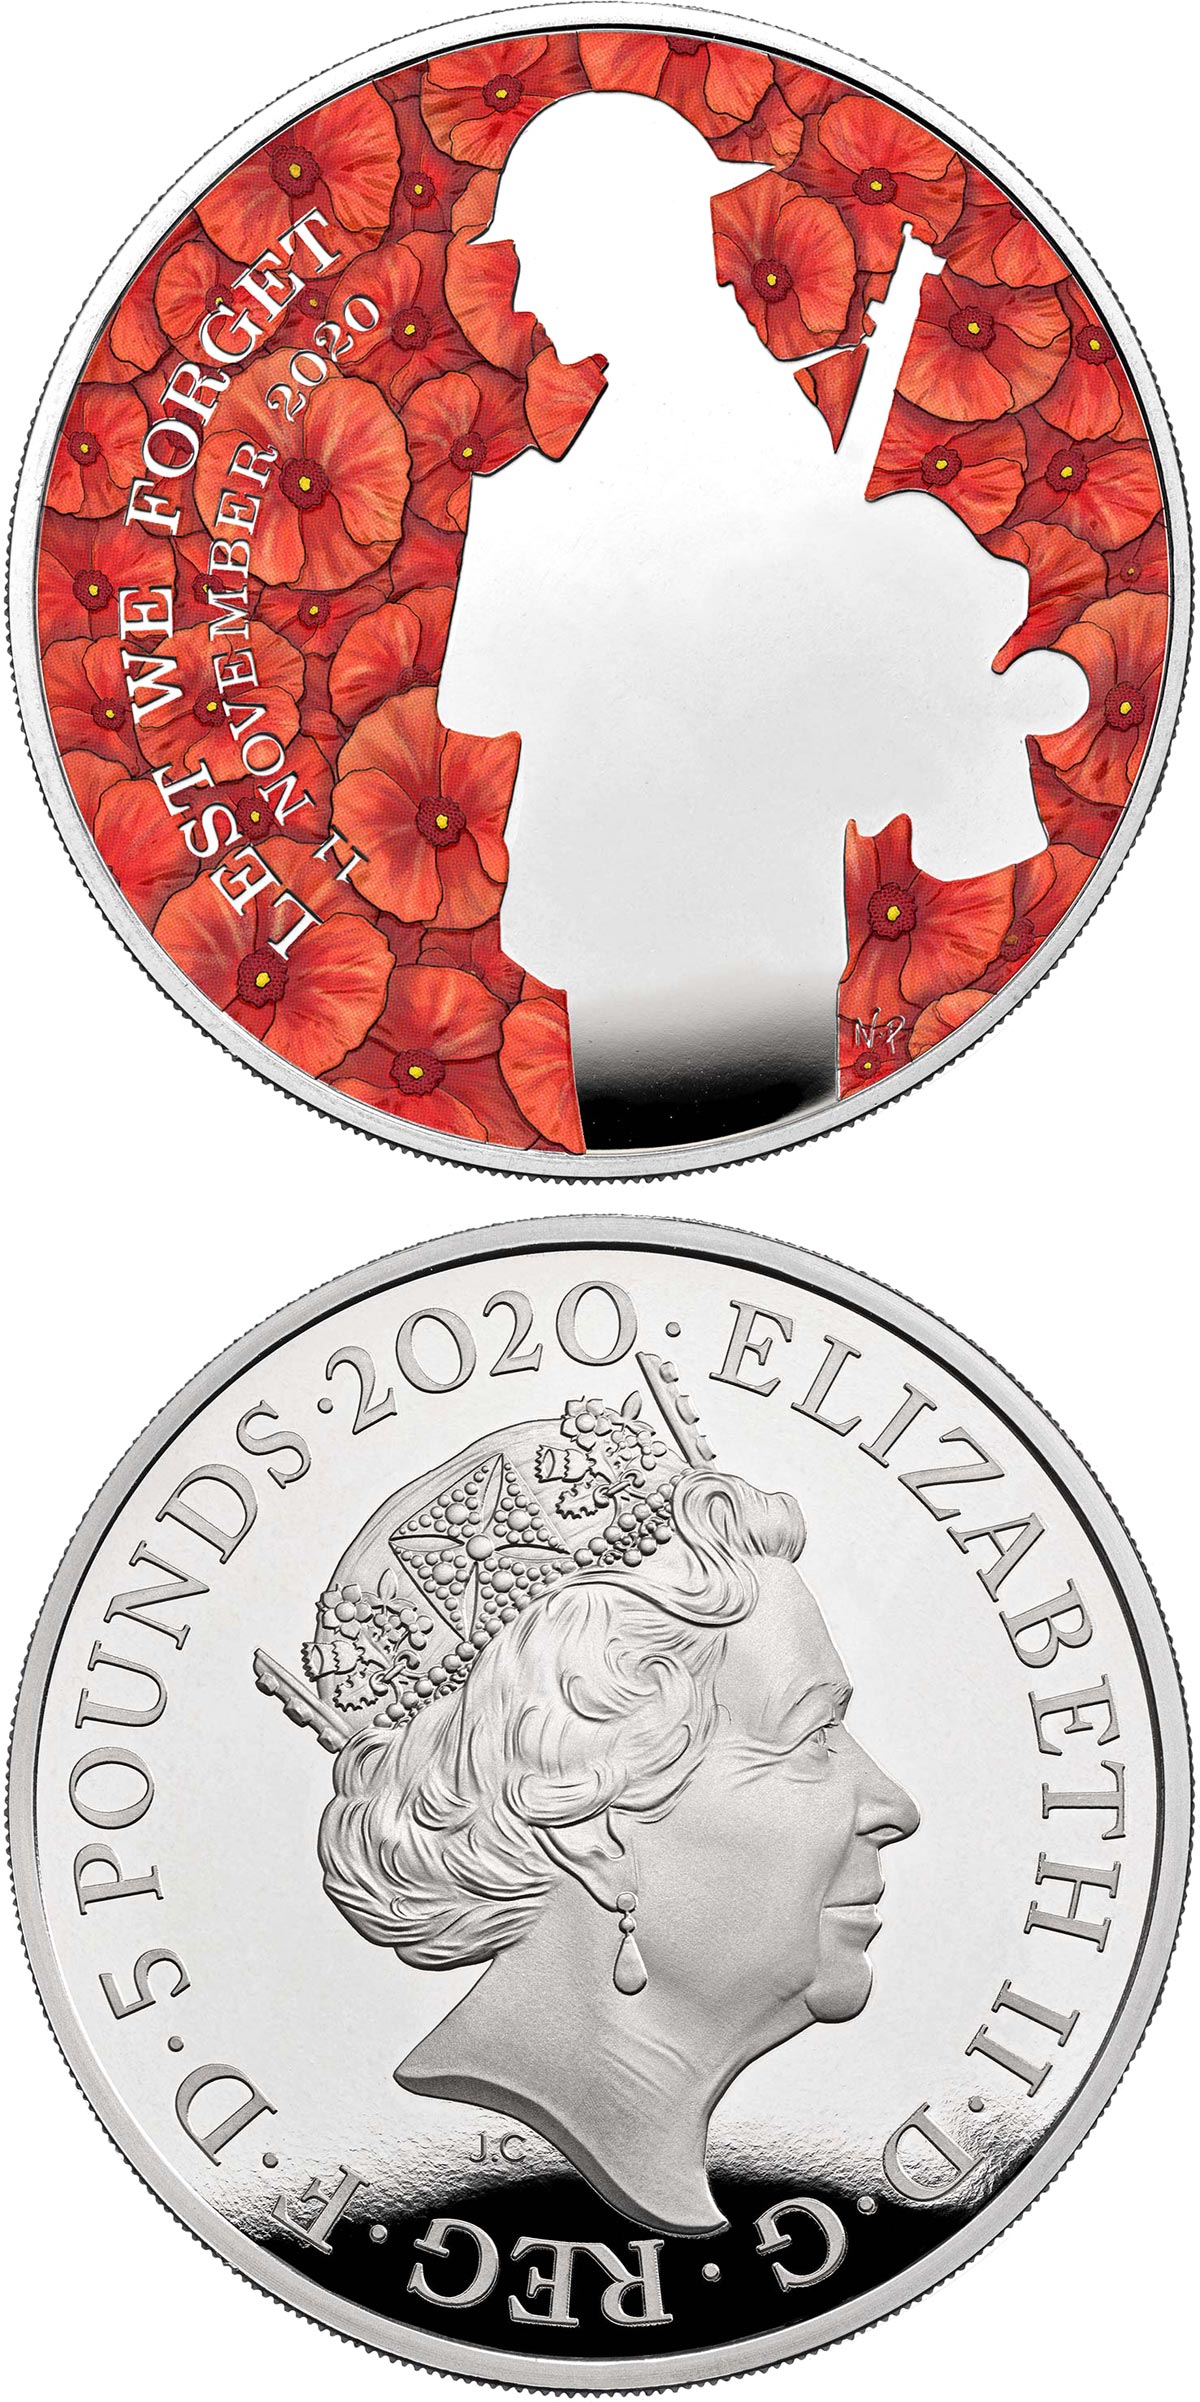 Image of 5 pounds coin - The Remembrance Day - 100 years since the burial of the Unknown Warrior | United Kingdom 2020.  The Copper–Nickel (CuNi) coin is of BU quality.